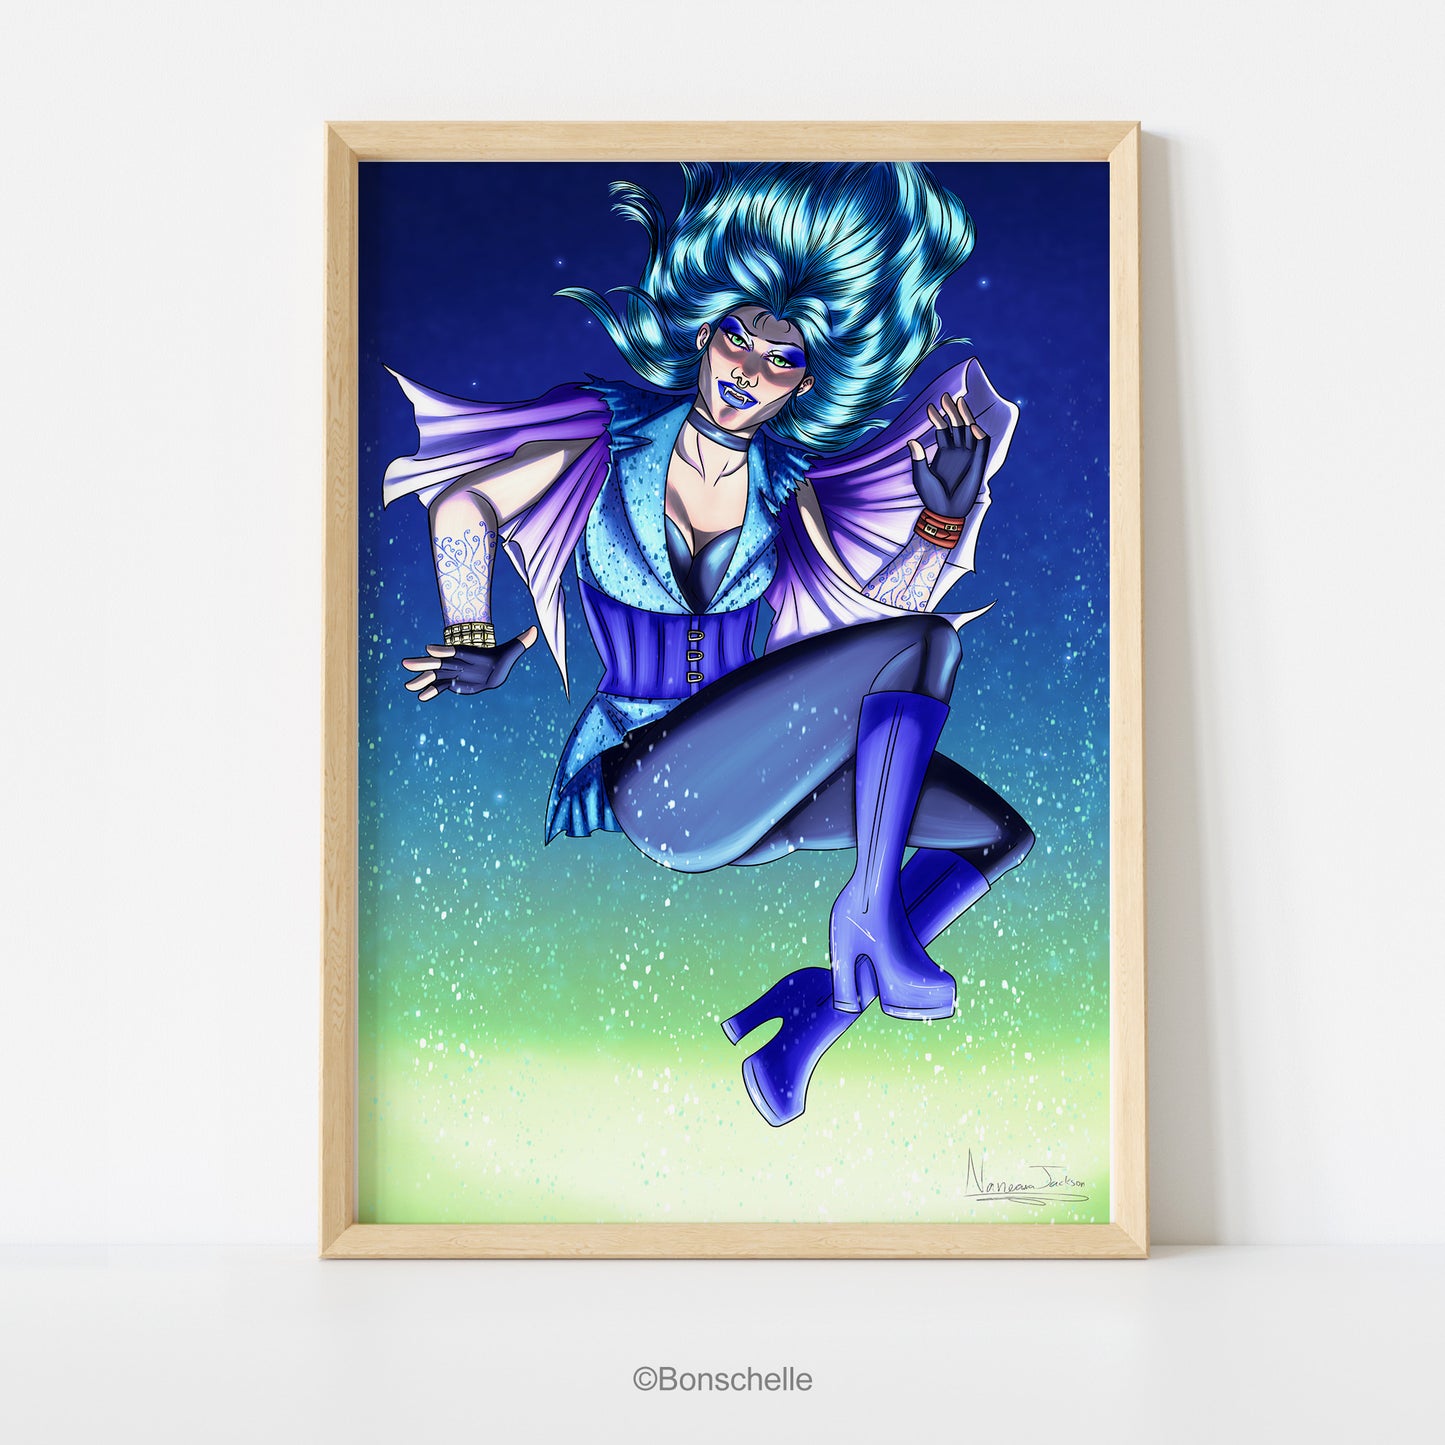 An original art print in which a vampire-witch with electric-blue hair flies in the air while the snow falls. The print has a thin pinewood frame.